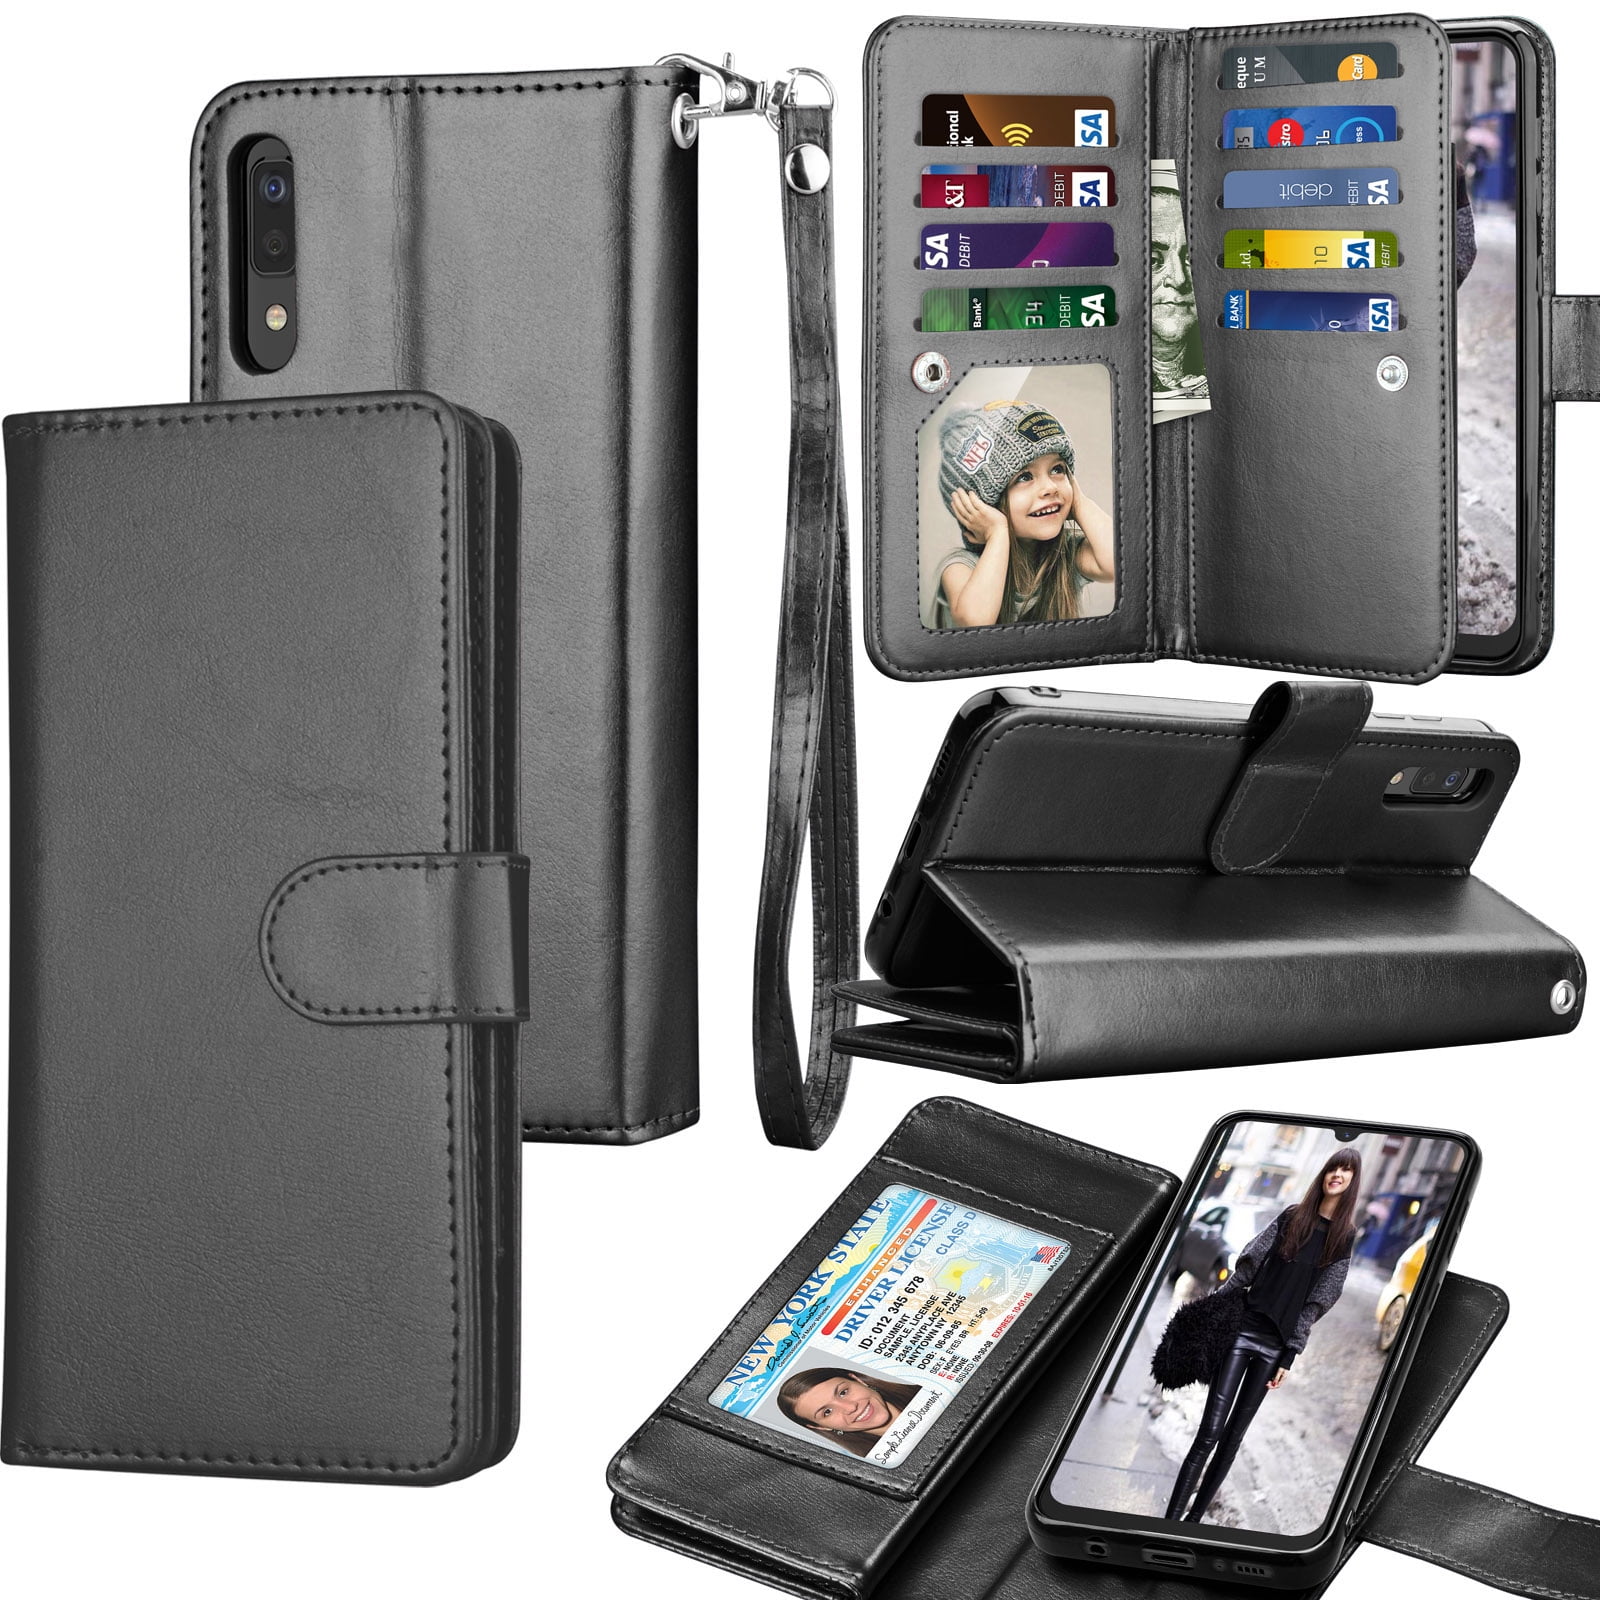 Samsung Galaxy A50 Flip Case Cover for Samsung Galaxy A50 Leather Kickstand Wallet Cover Card Holders Premium Business with Free Waterproof-Bag 